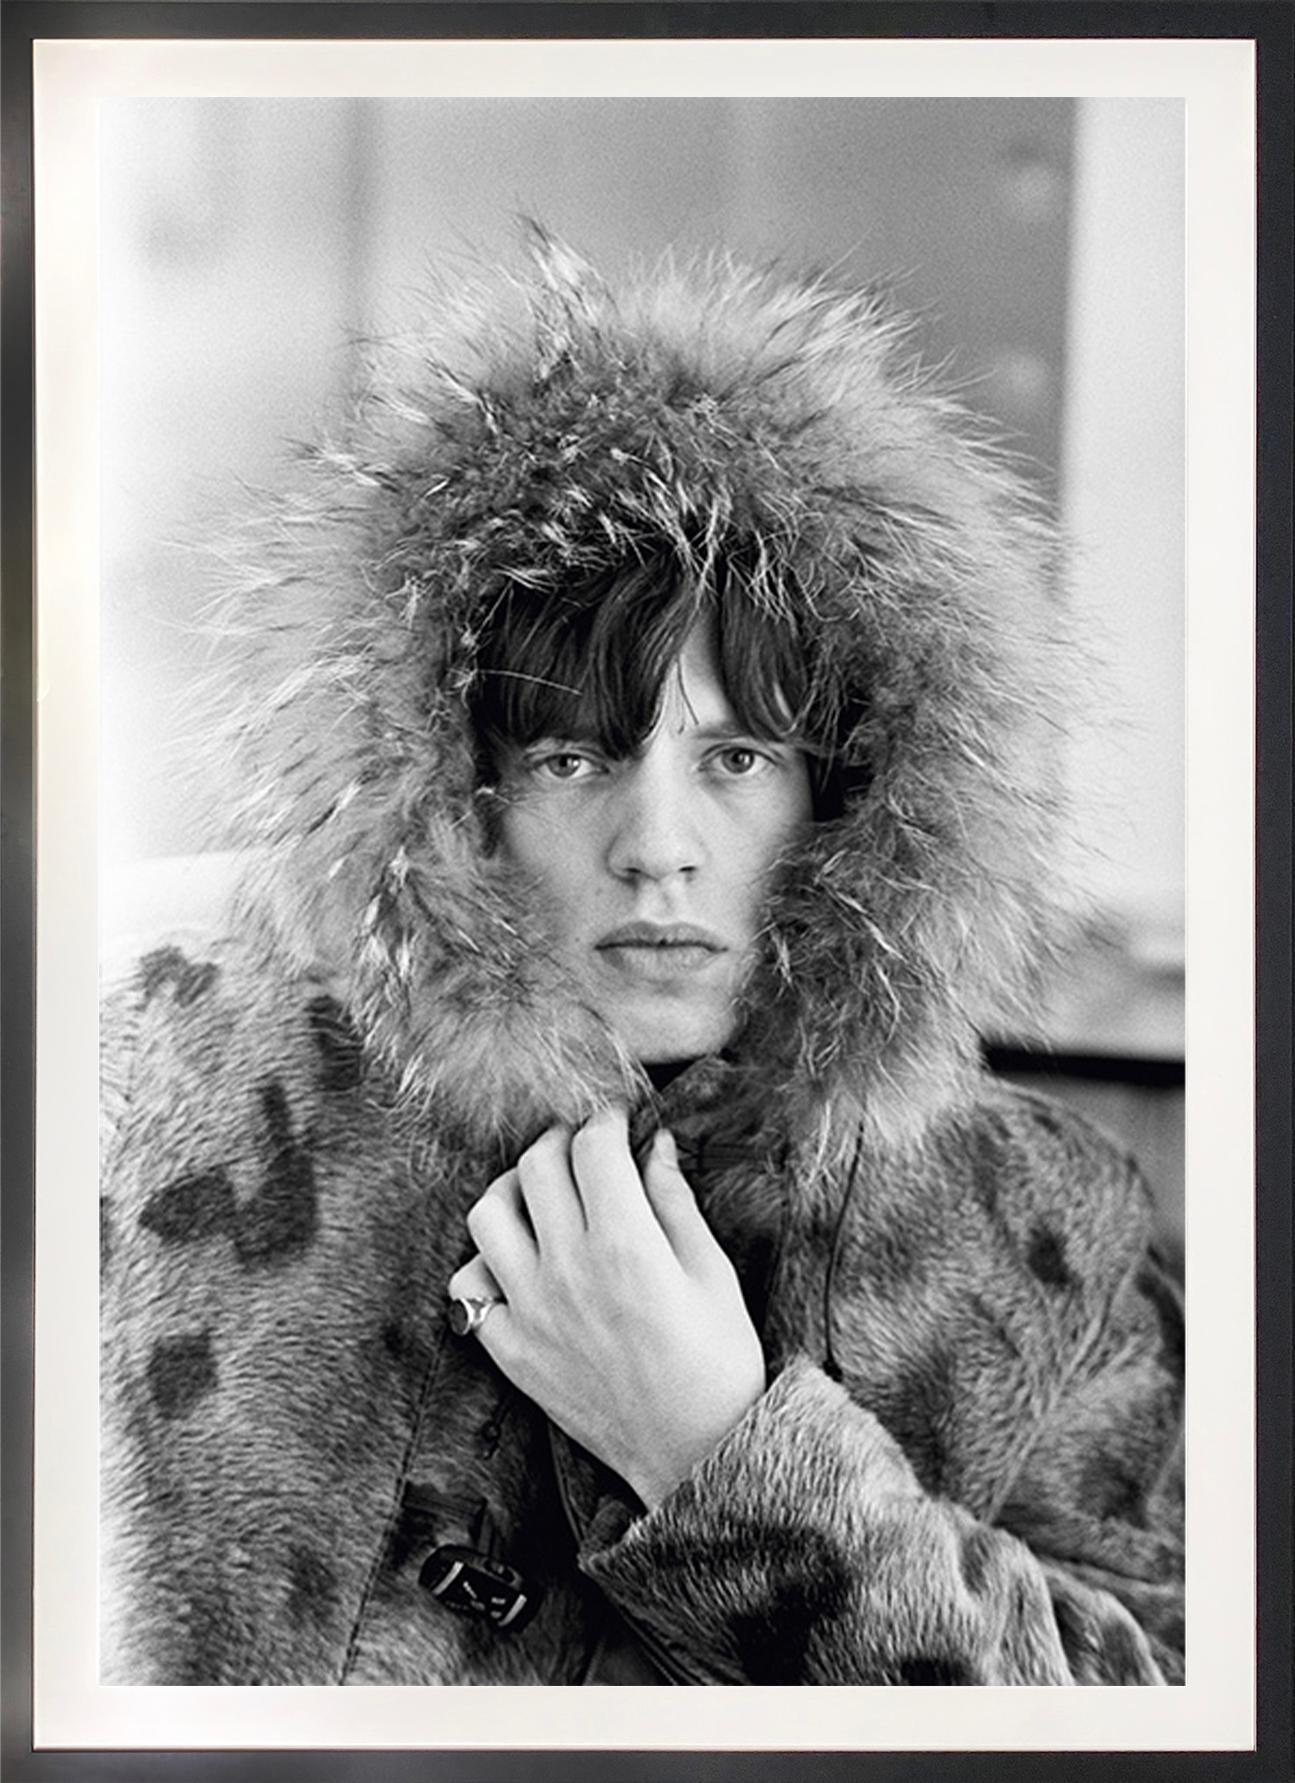 Mick's Parka  - Photograph by Terry O'Neill